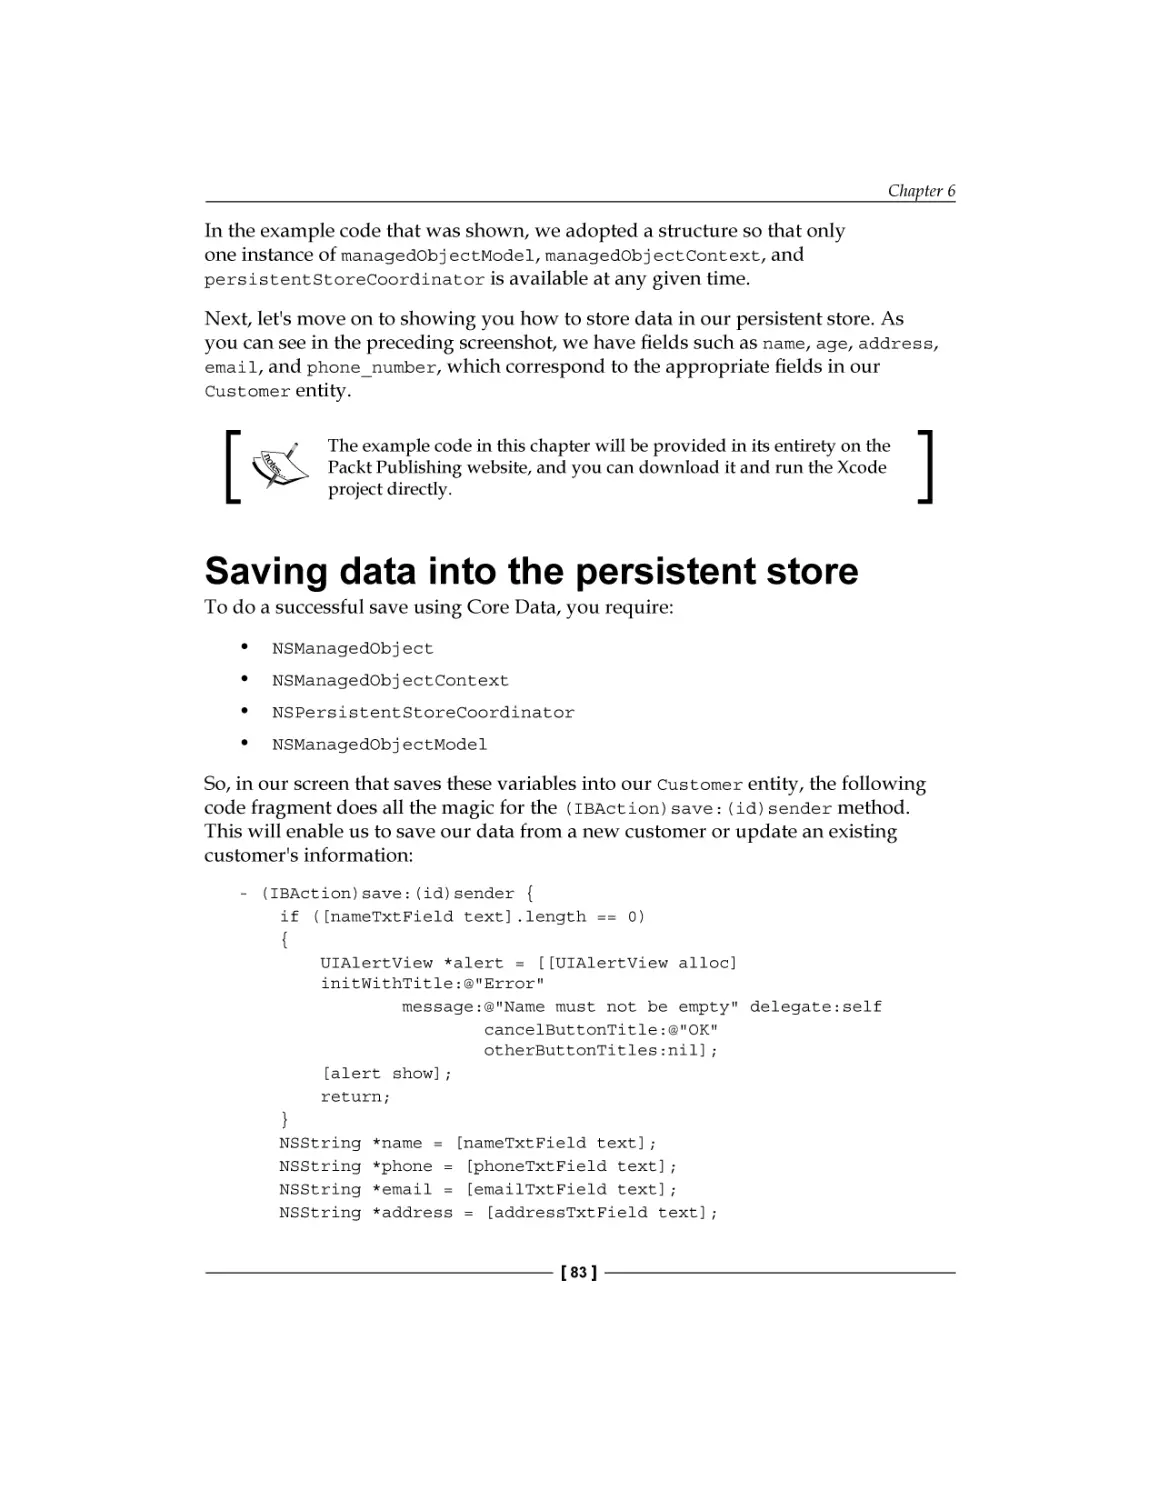 Saving data into the persistent store